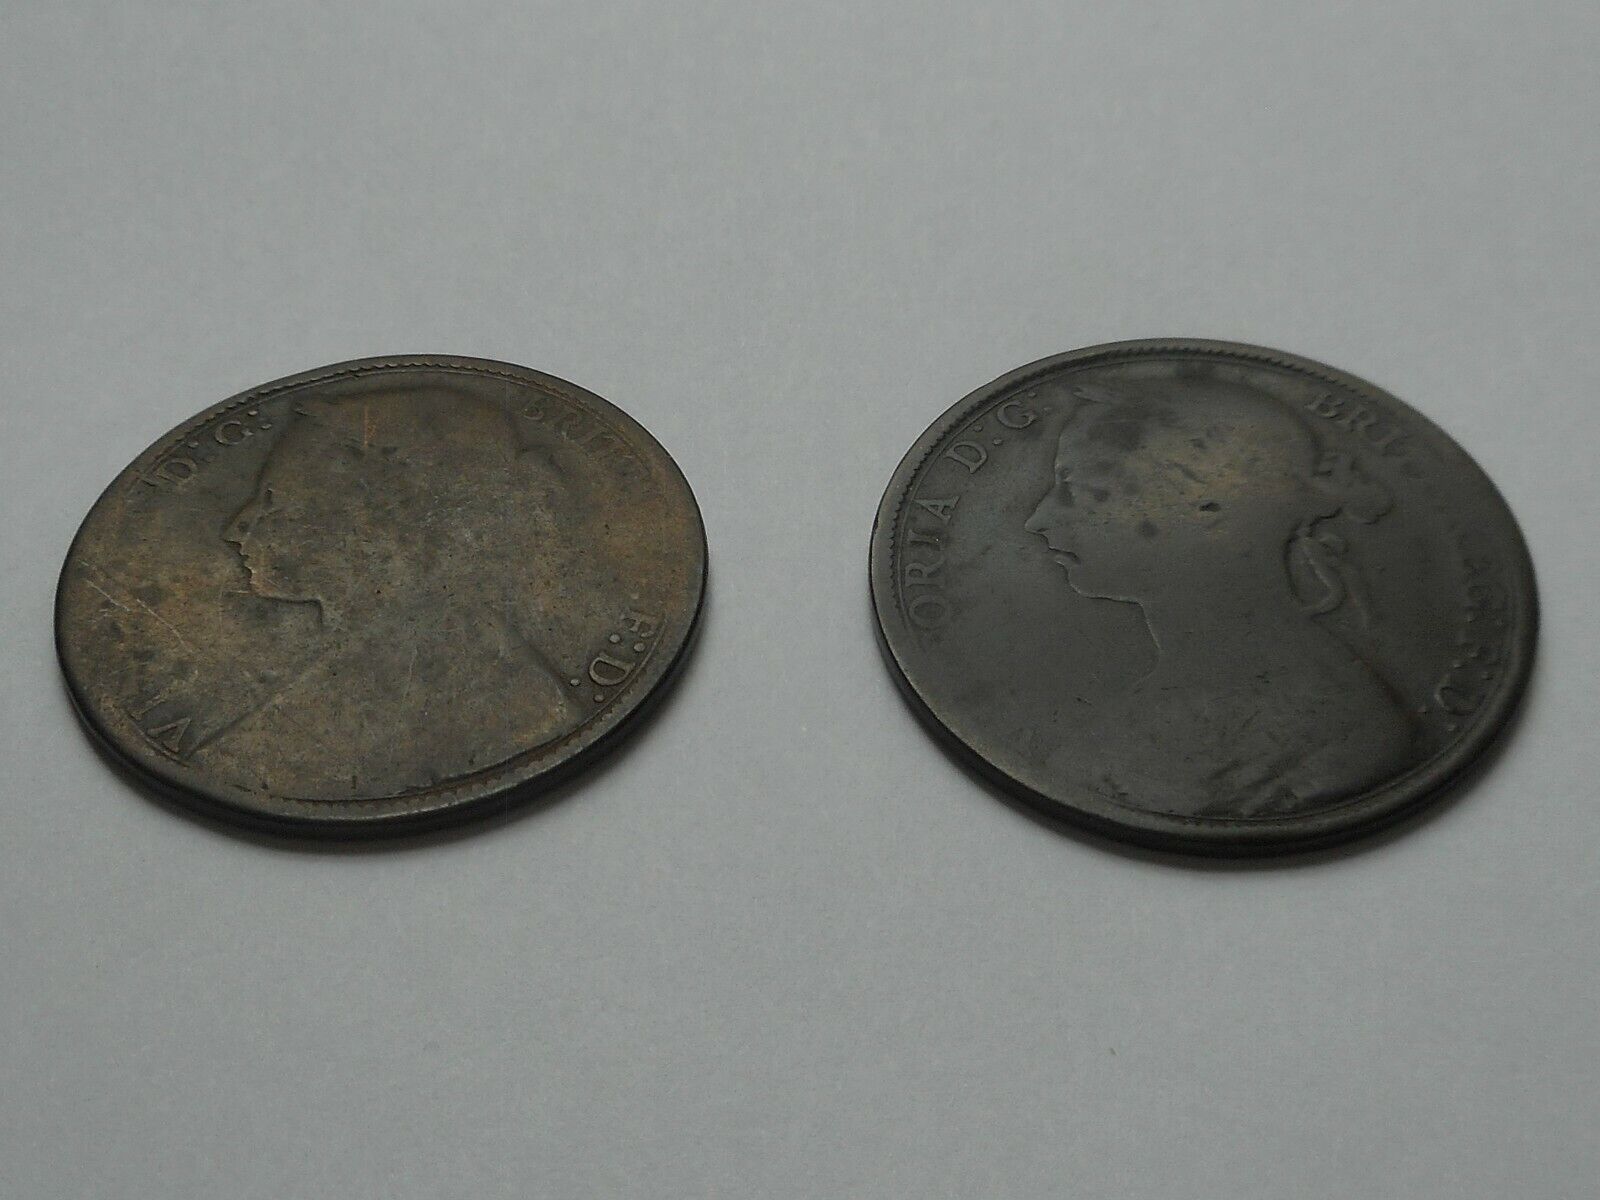 1877 & 1890 LOT OF 2 COINS BRITAIN One Penny 1 Pence Cent Queen Victoria Без бренда - фотография #3